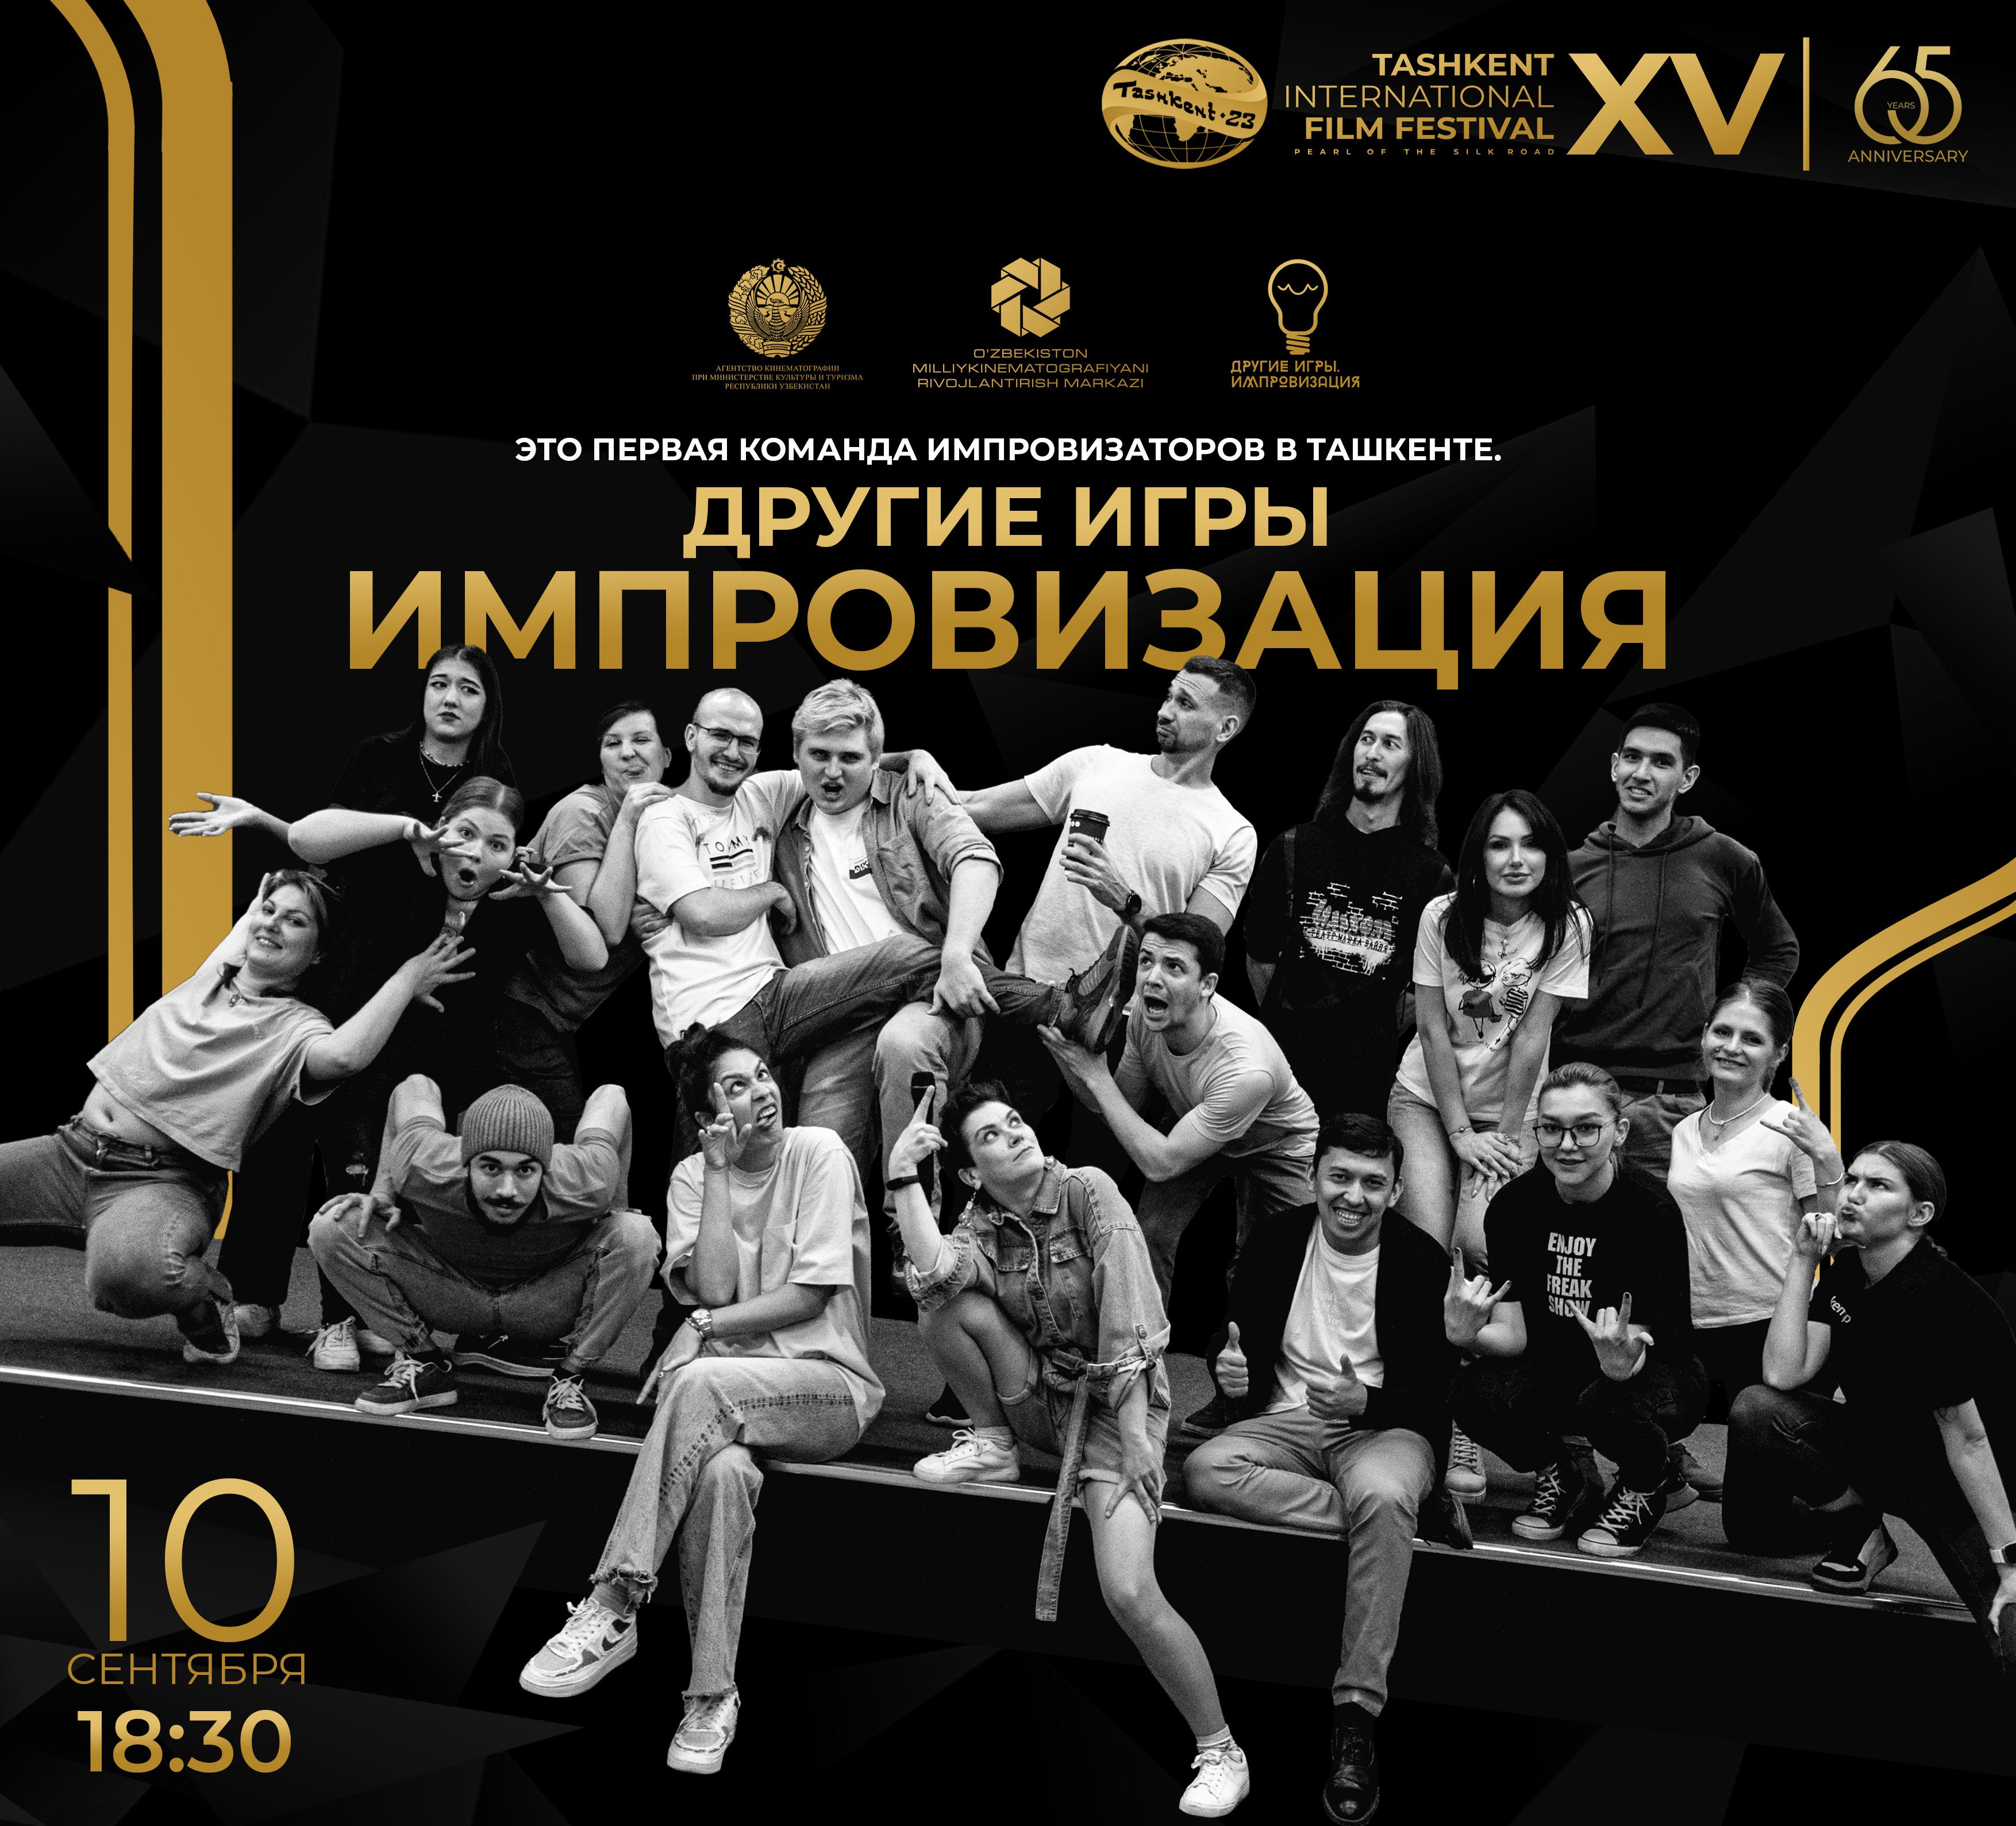 On the eve of the Tashkent International Film Festival, special events will be organized